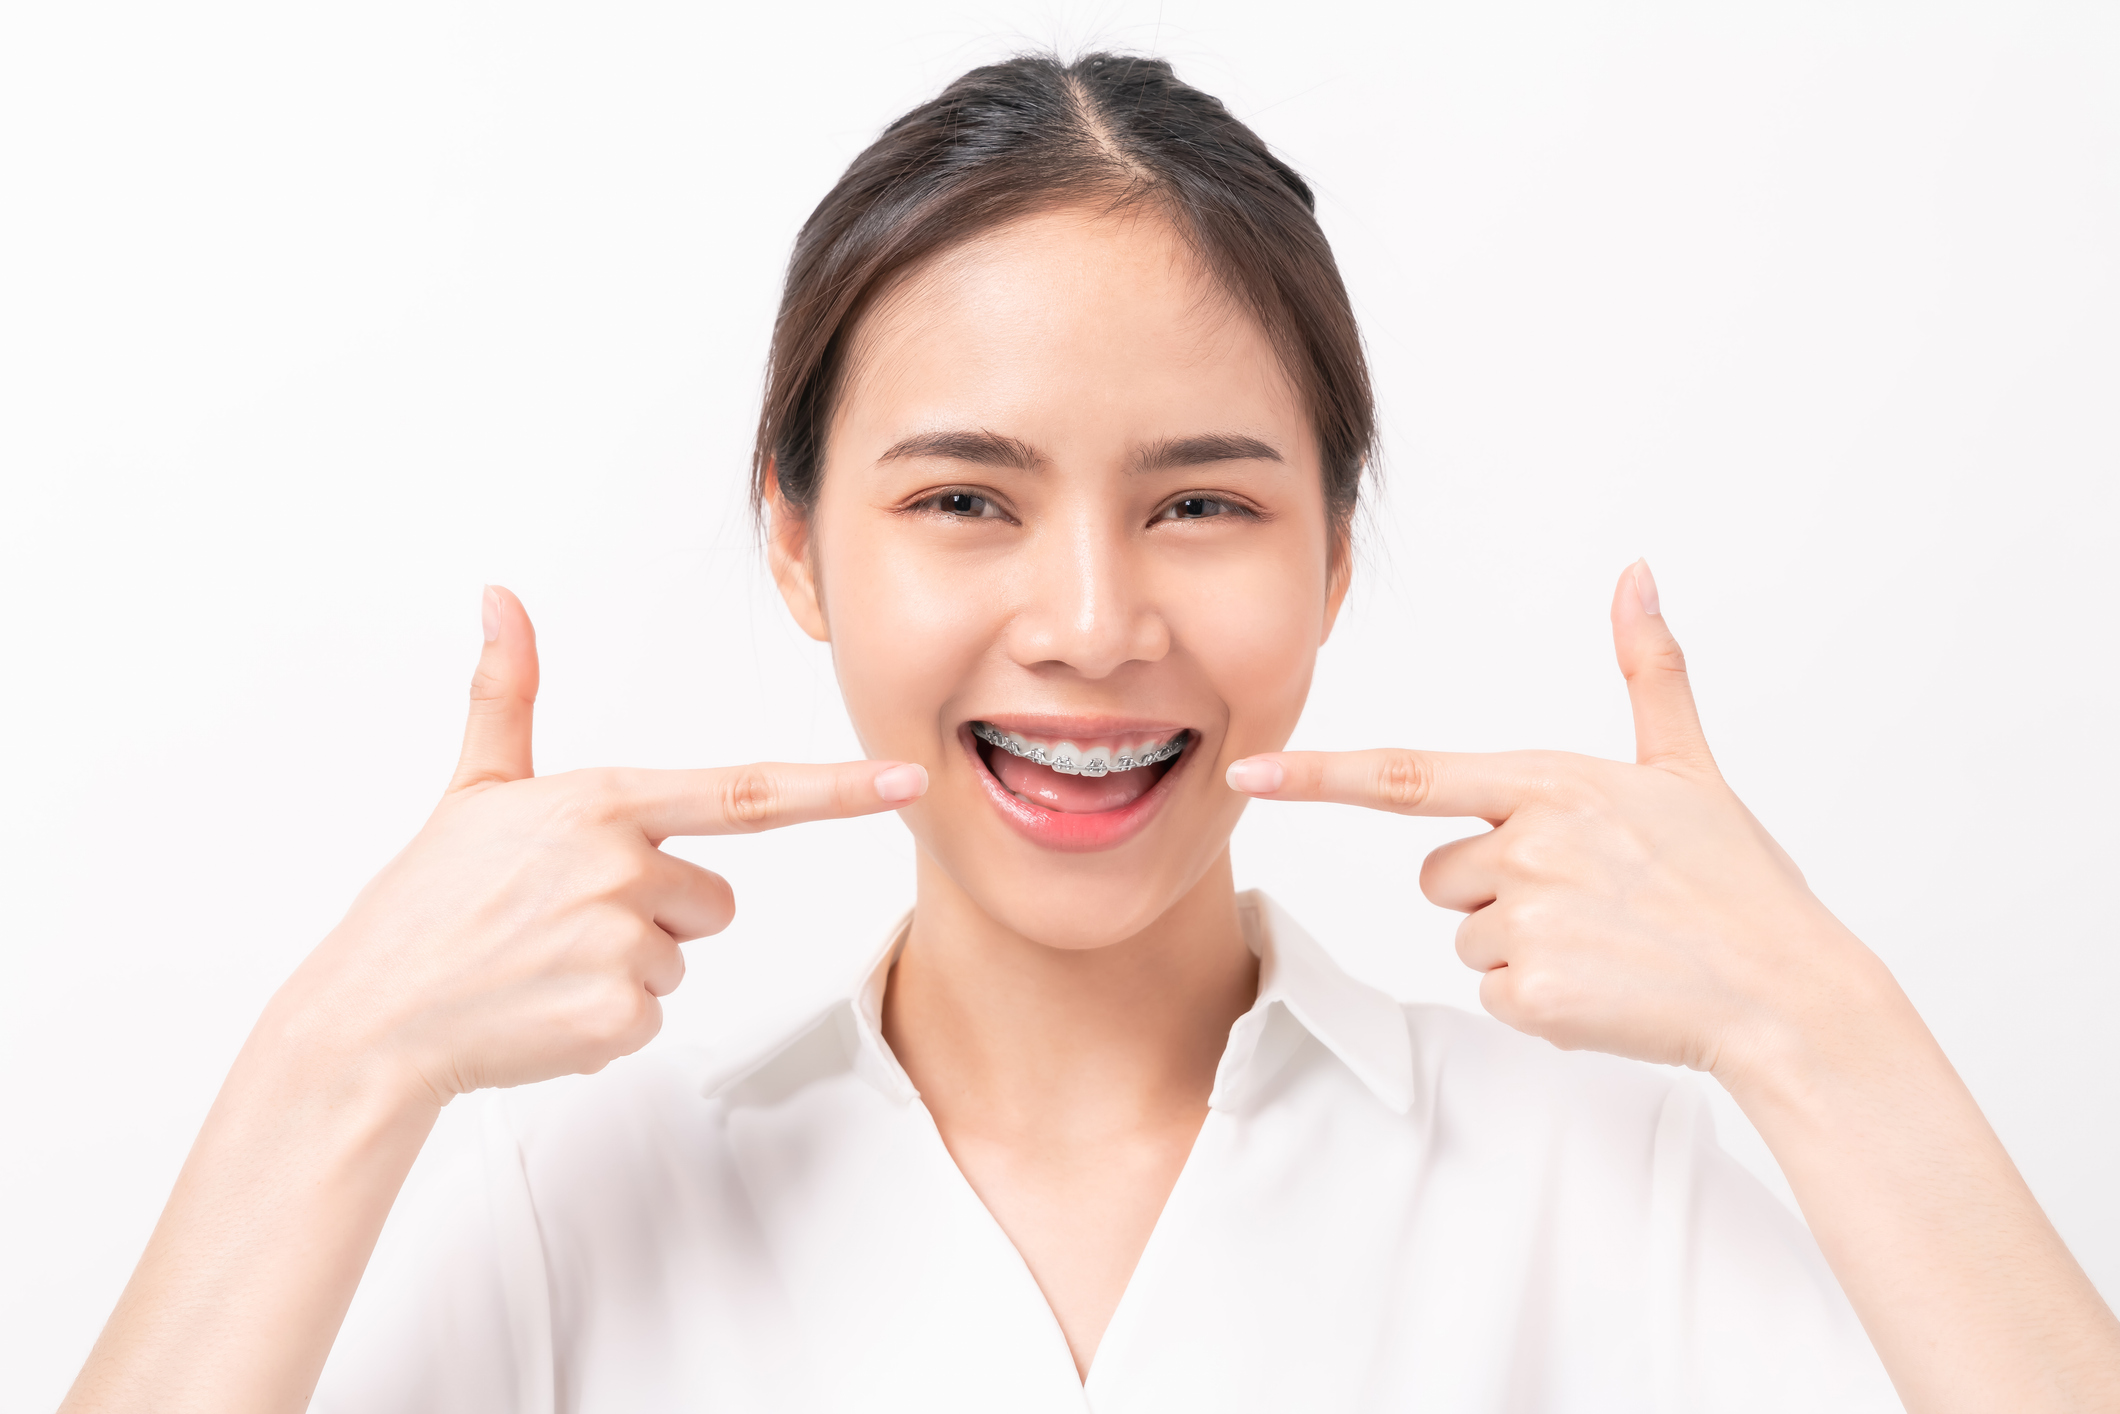 5 Facts about Self-ligating Braces: The Basics You Should Know